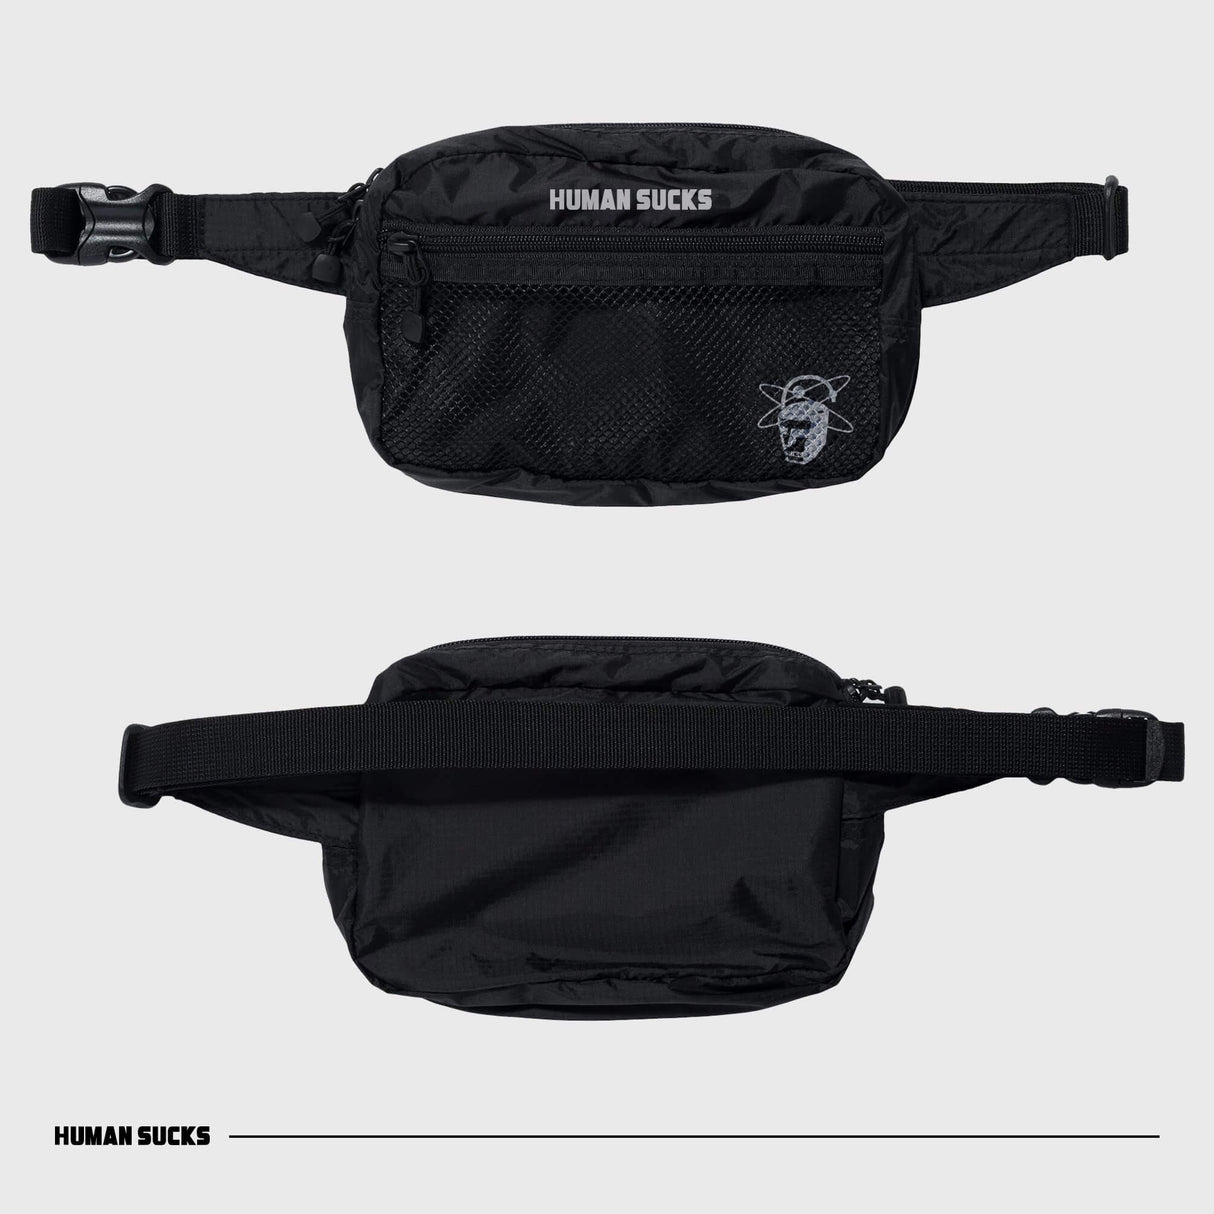 HUMAN SUCKS Black Fanny Pack front and top view, adjustable strap, with logo